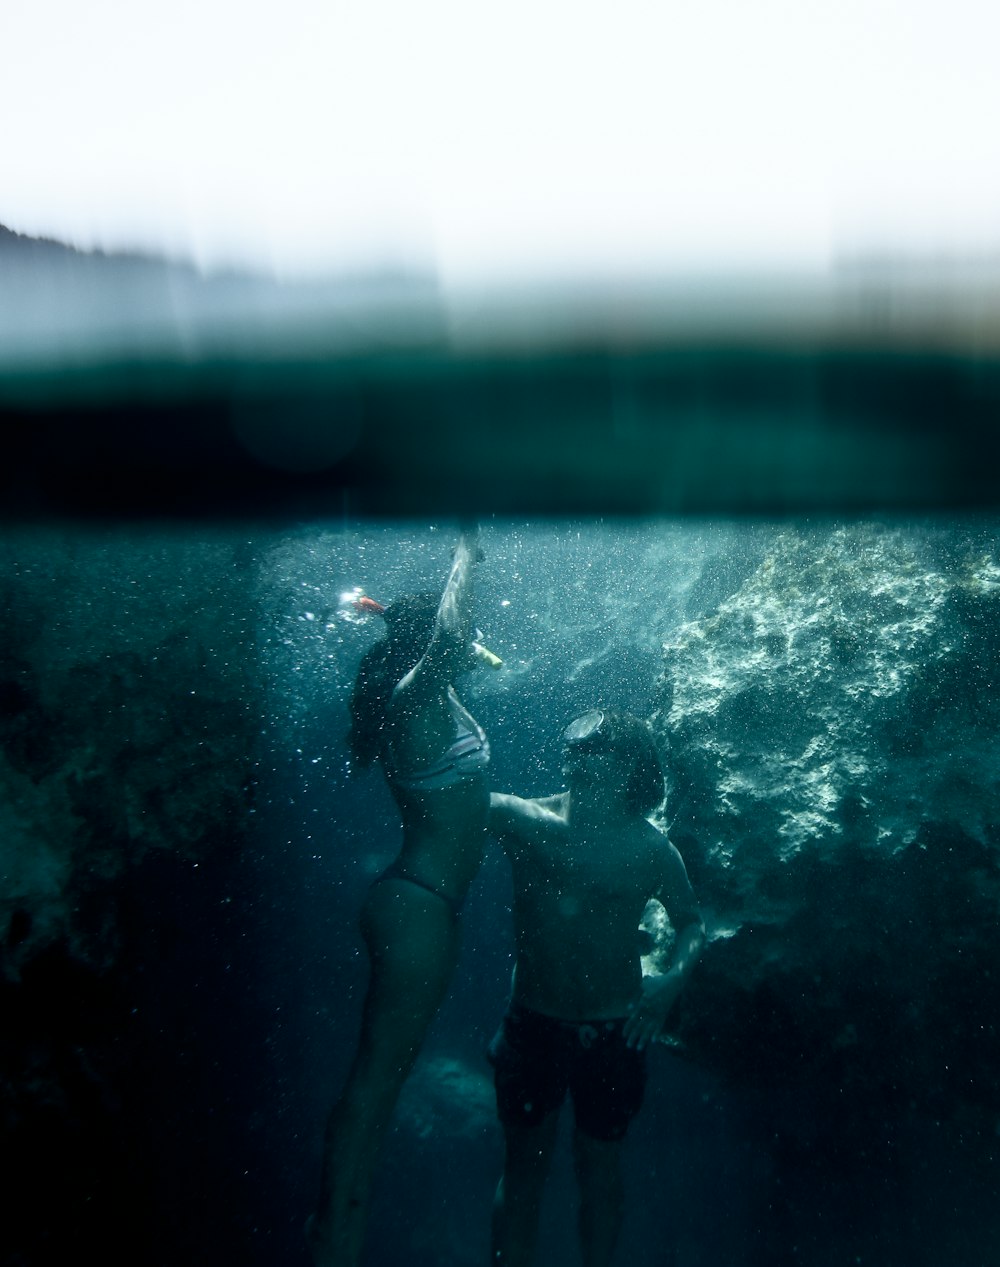 woman and man snorkeling under water